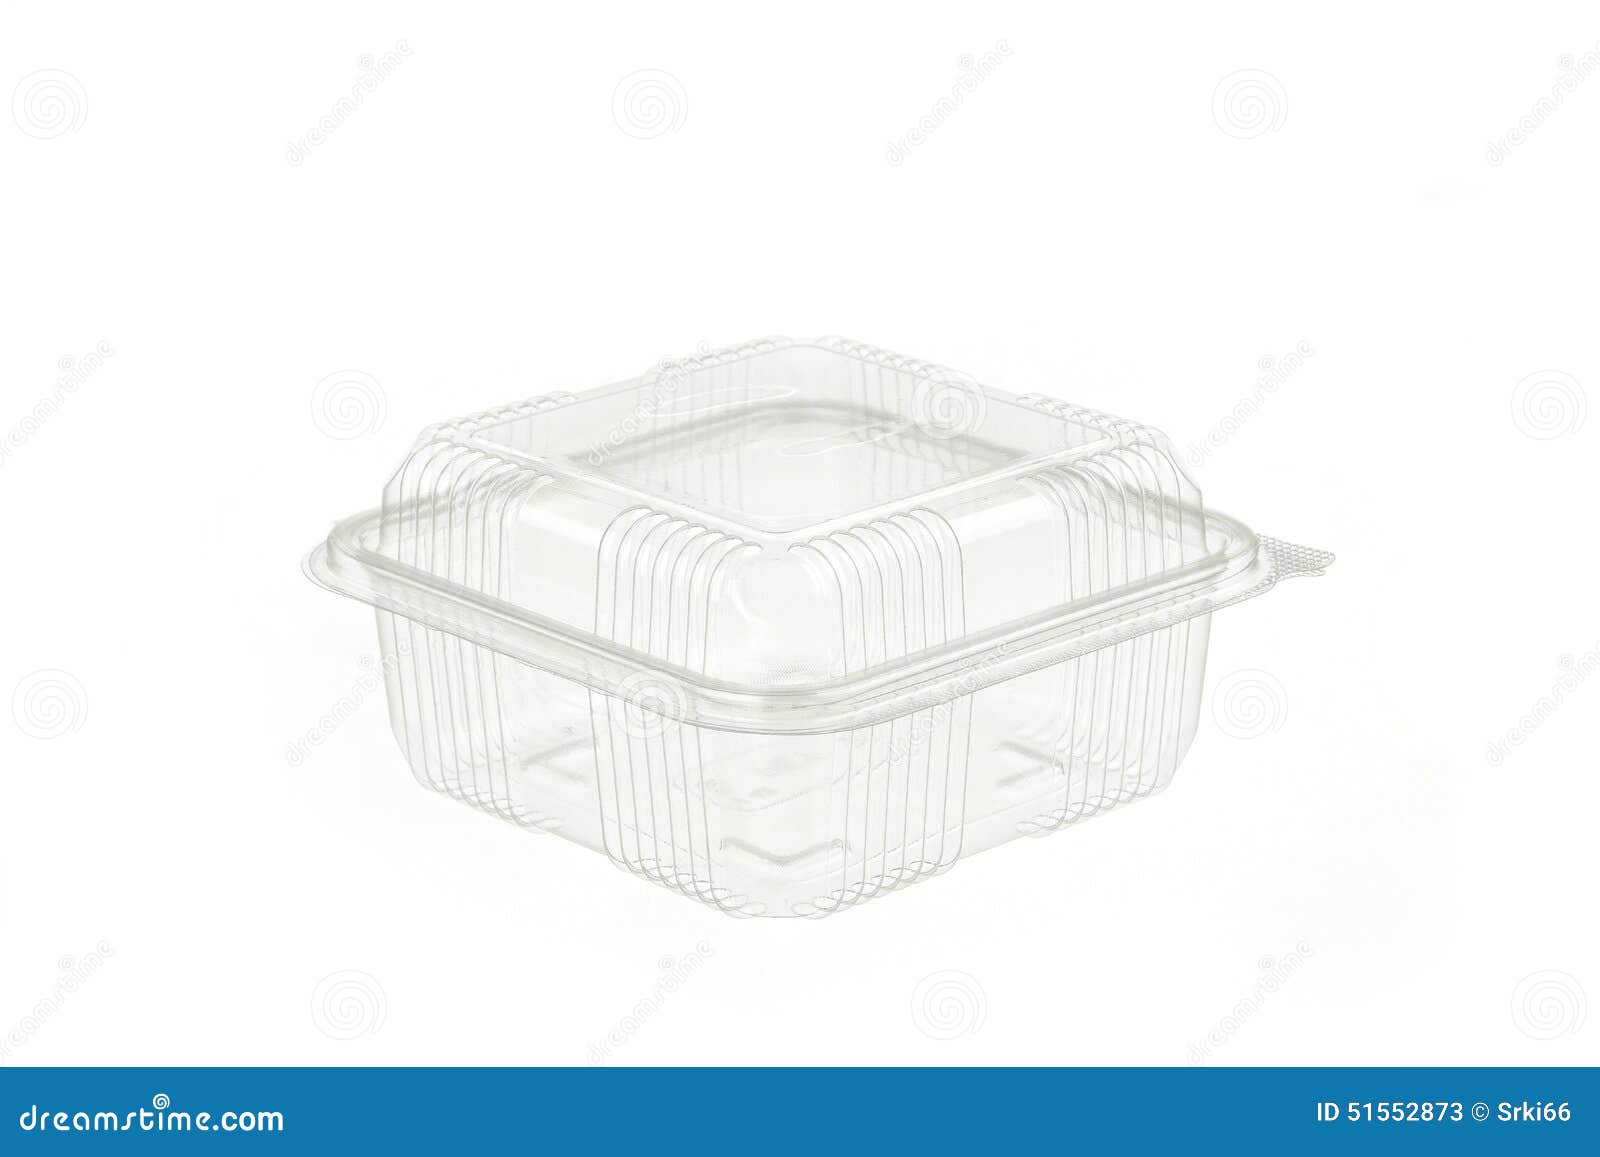 https://thumbs.dreamstime.com/z/plastic-container-transparent-isolated-white-51552873.jpg